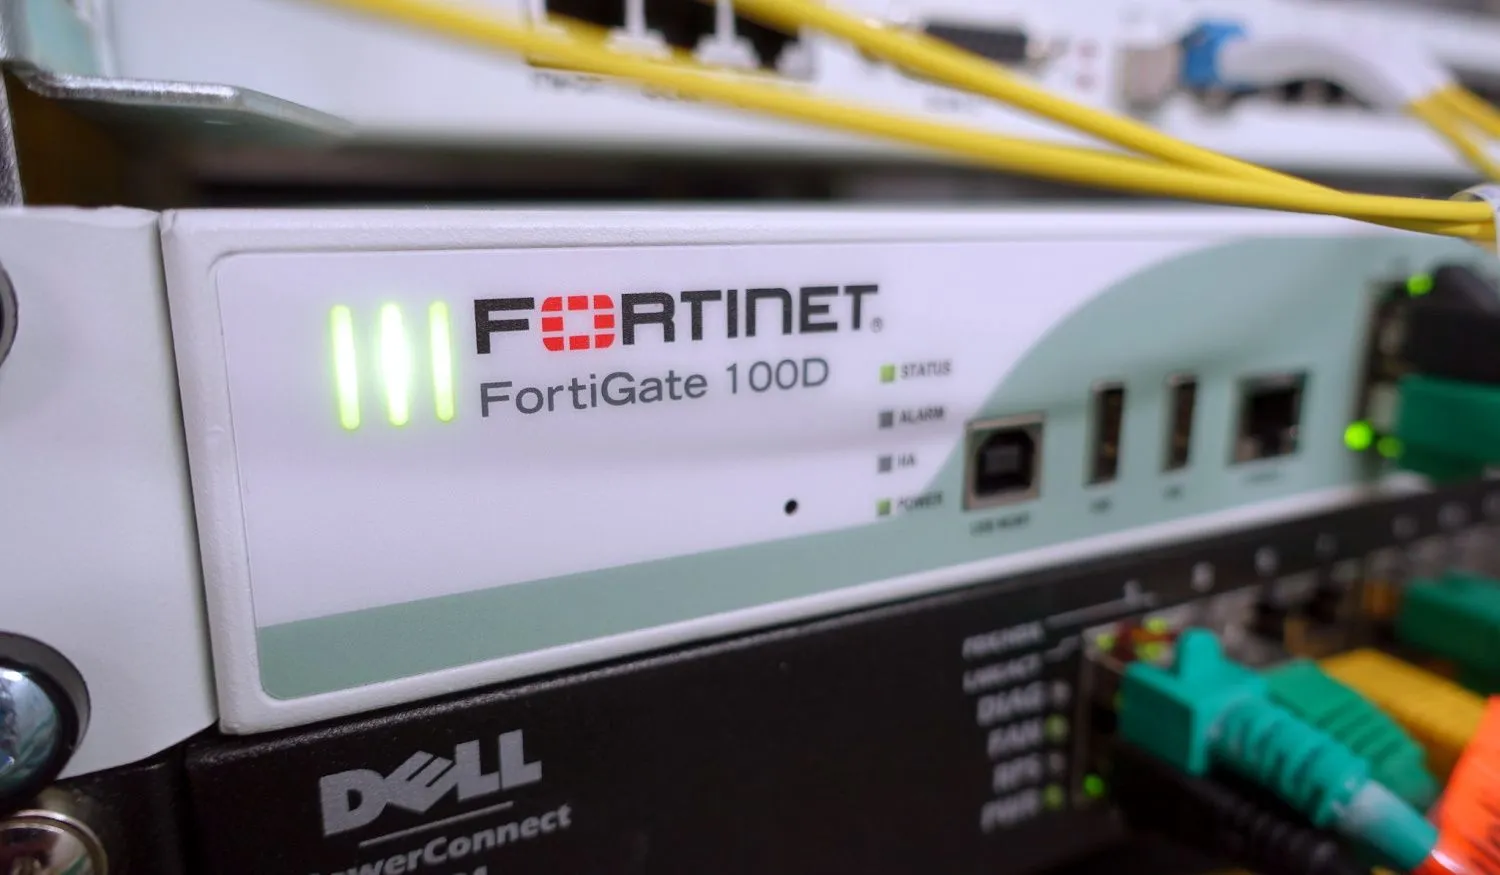 Fortinet device